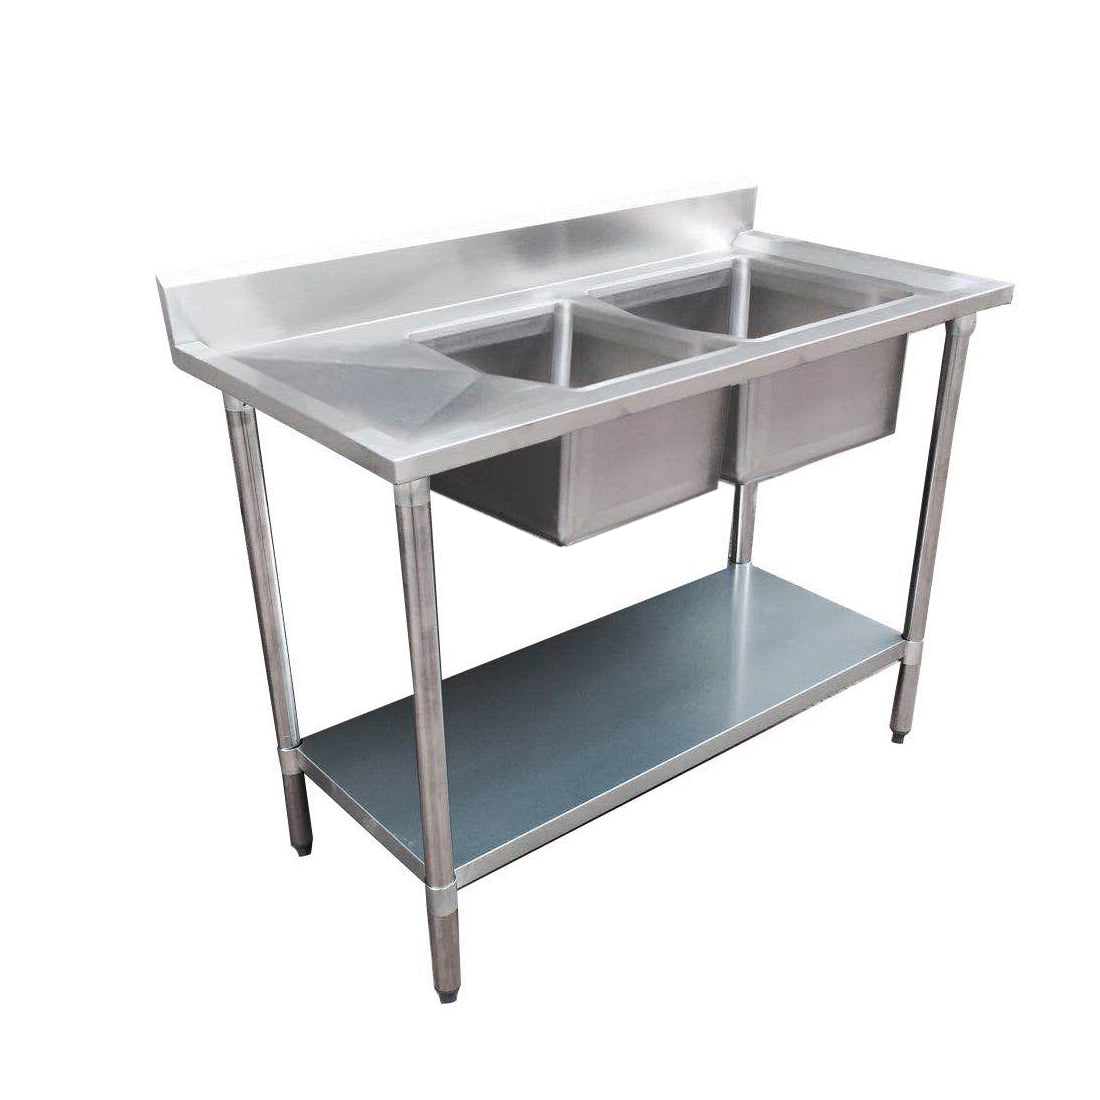 Economic 304 Grade SS Right Double Sink Bench 1800x600x900 with two 610x400x250 sinks 1800-6-DSBR